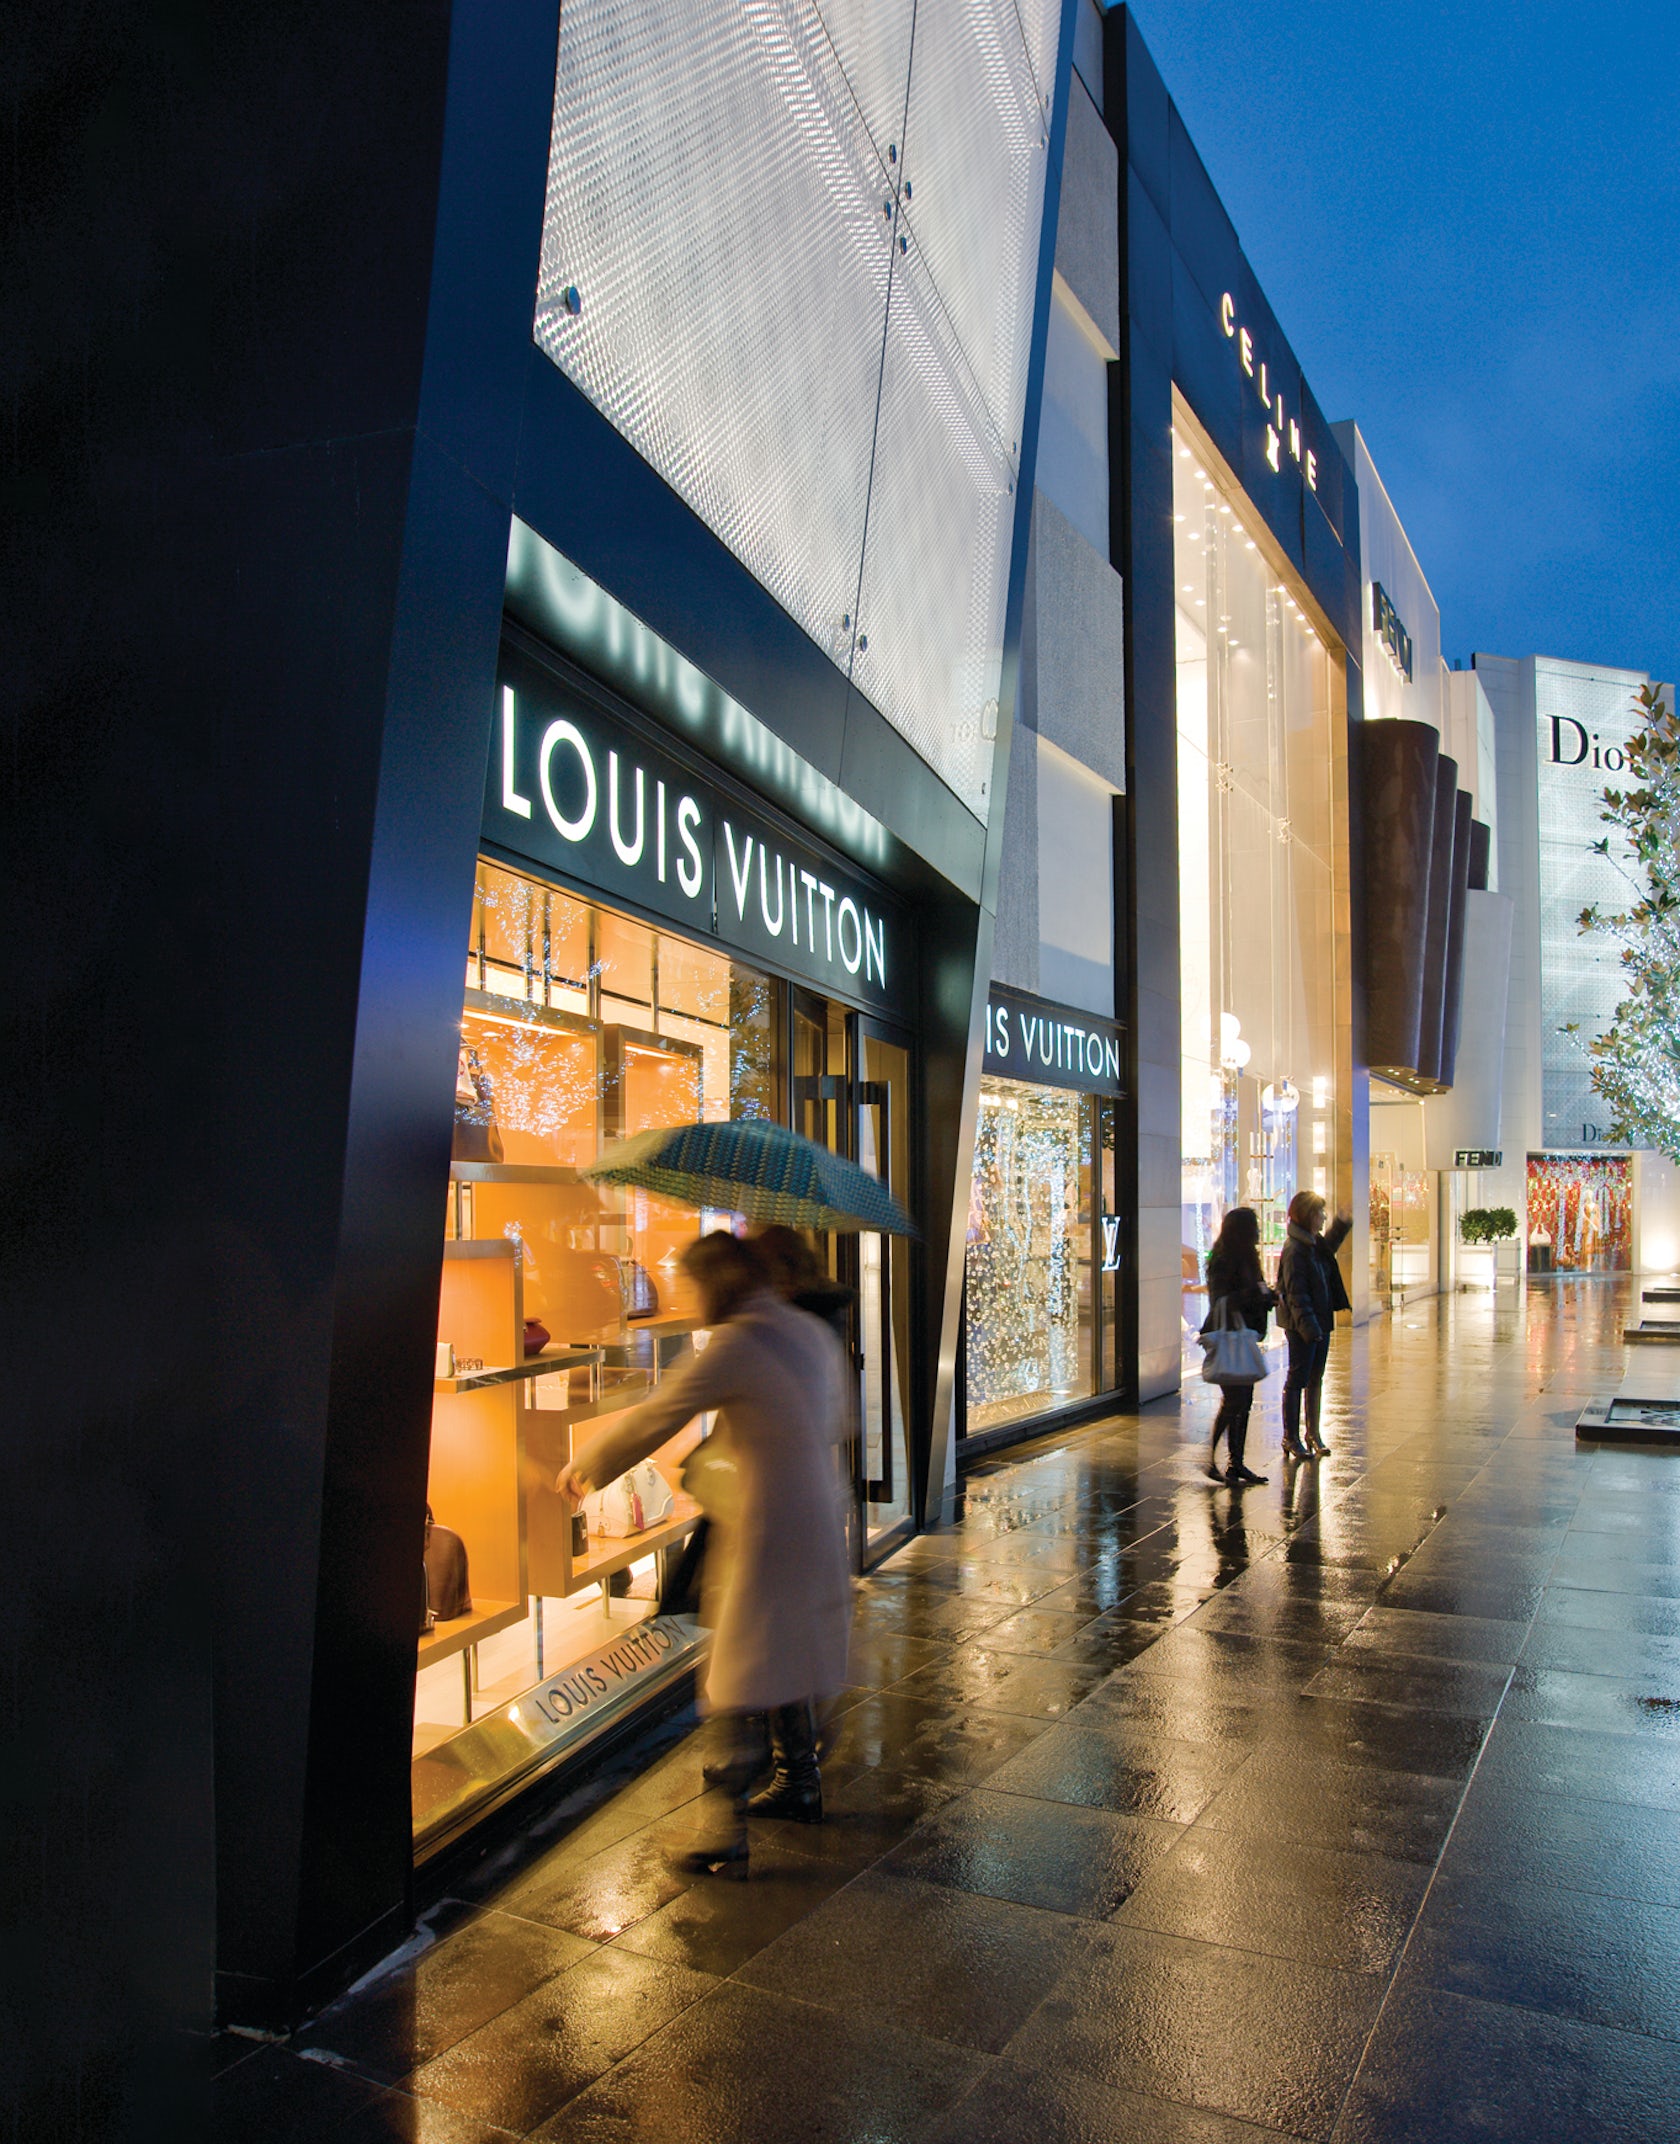 Louis Vuitton Istanbul Istinye Park shopping mall is a unique